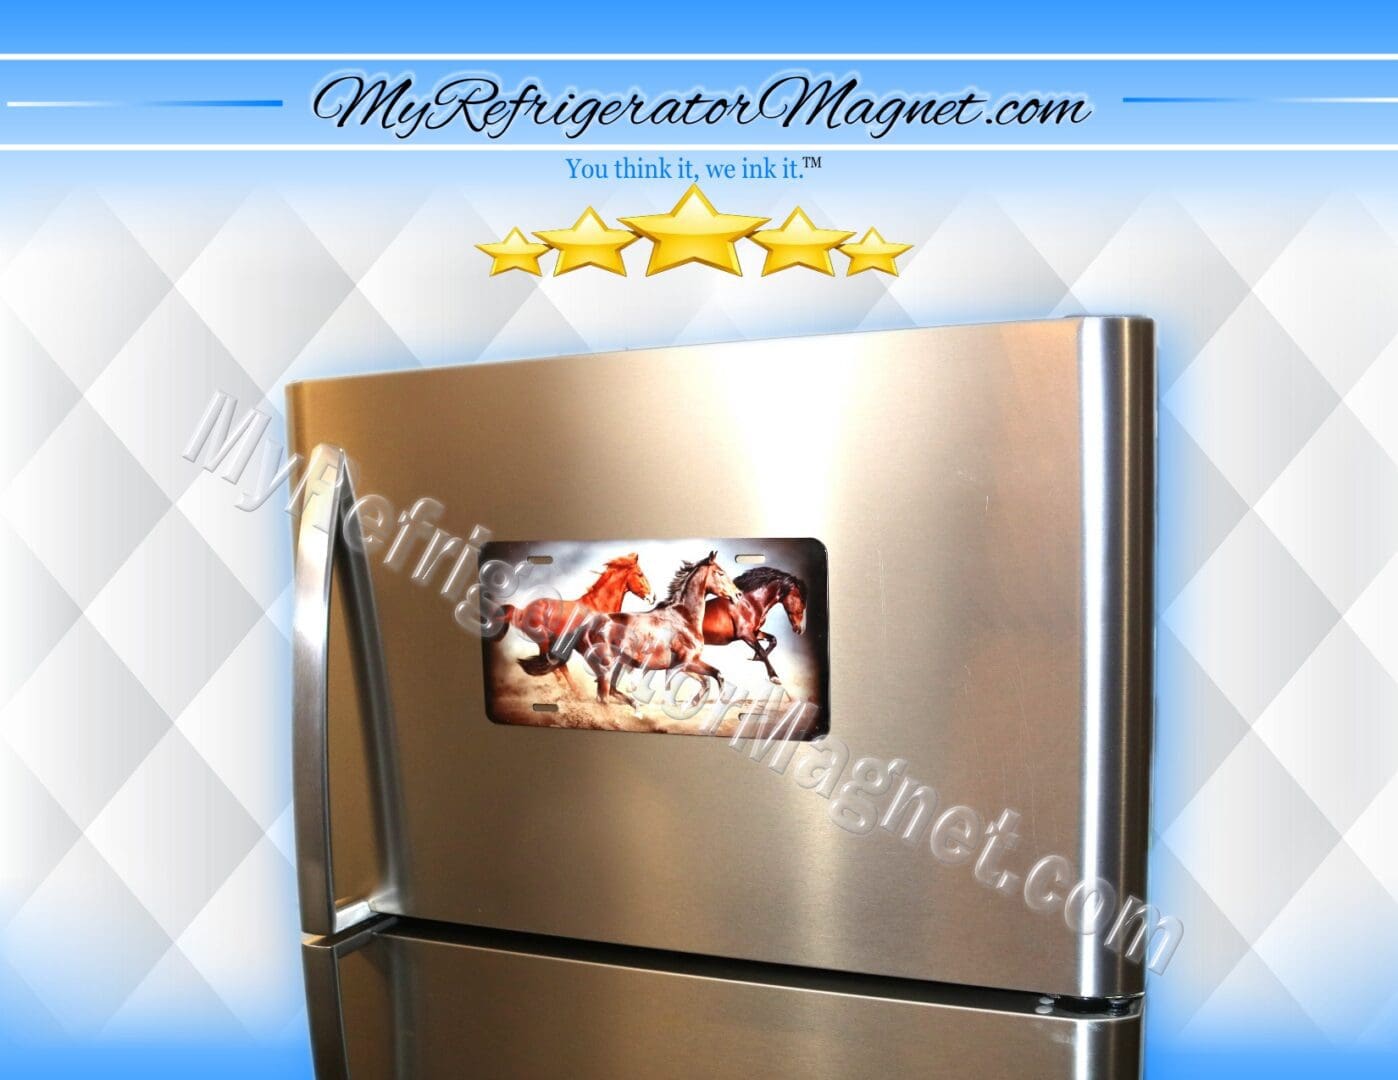 A refrigerator with a picture of horses on it.